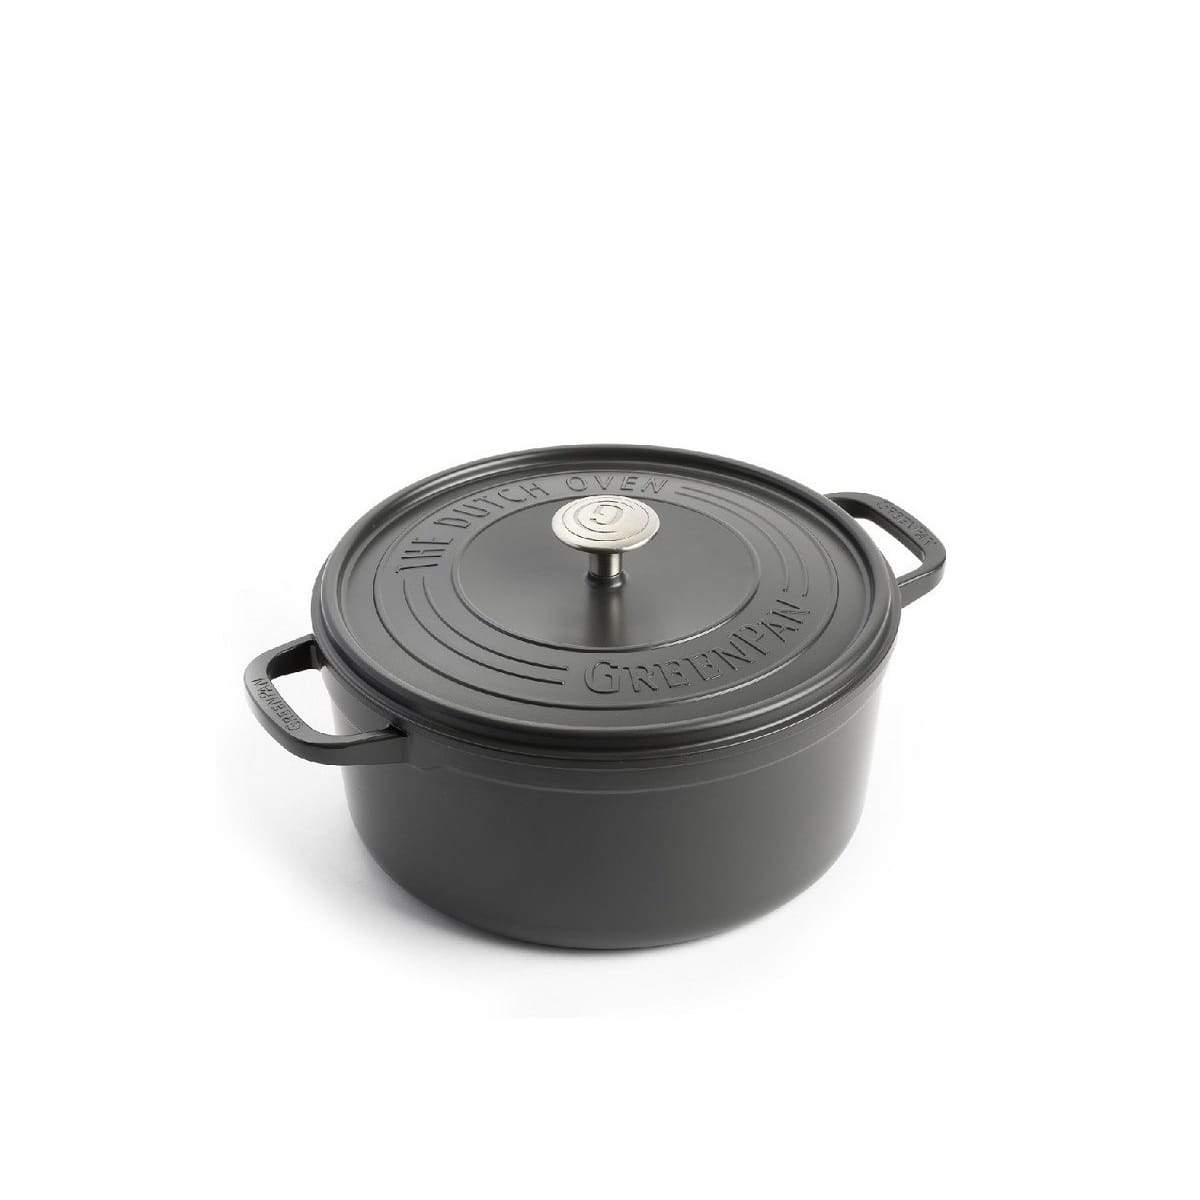 CC002298-001 - Featherweights Casserole with Lid, Browny Black - 22cm - Product Image 1